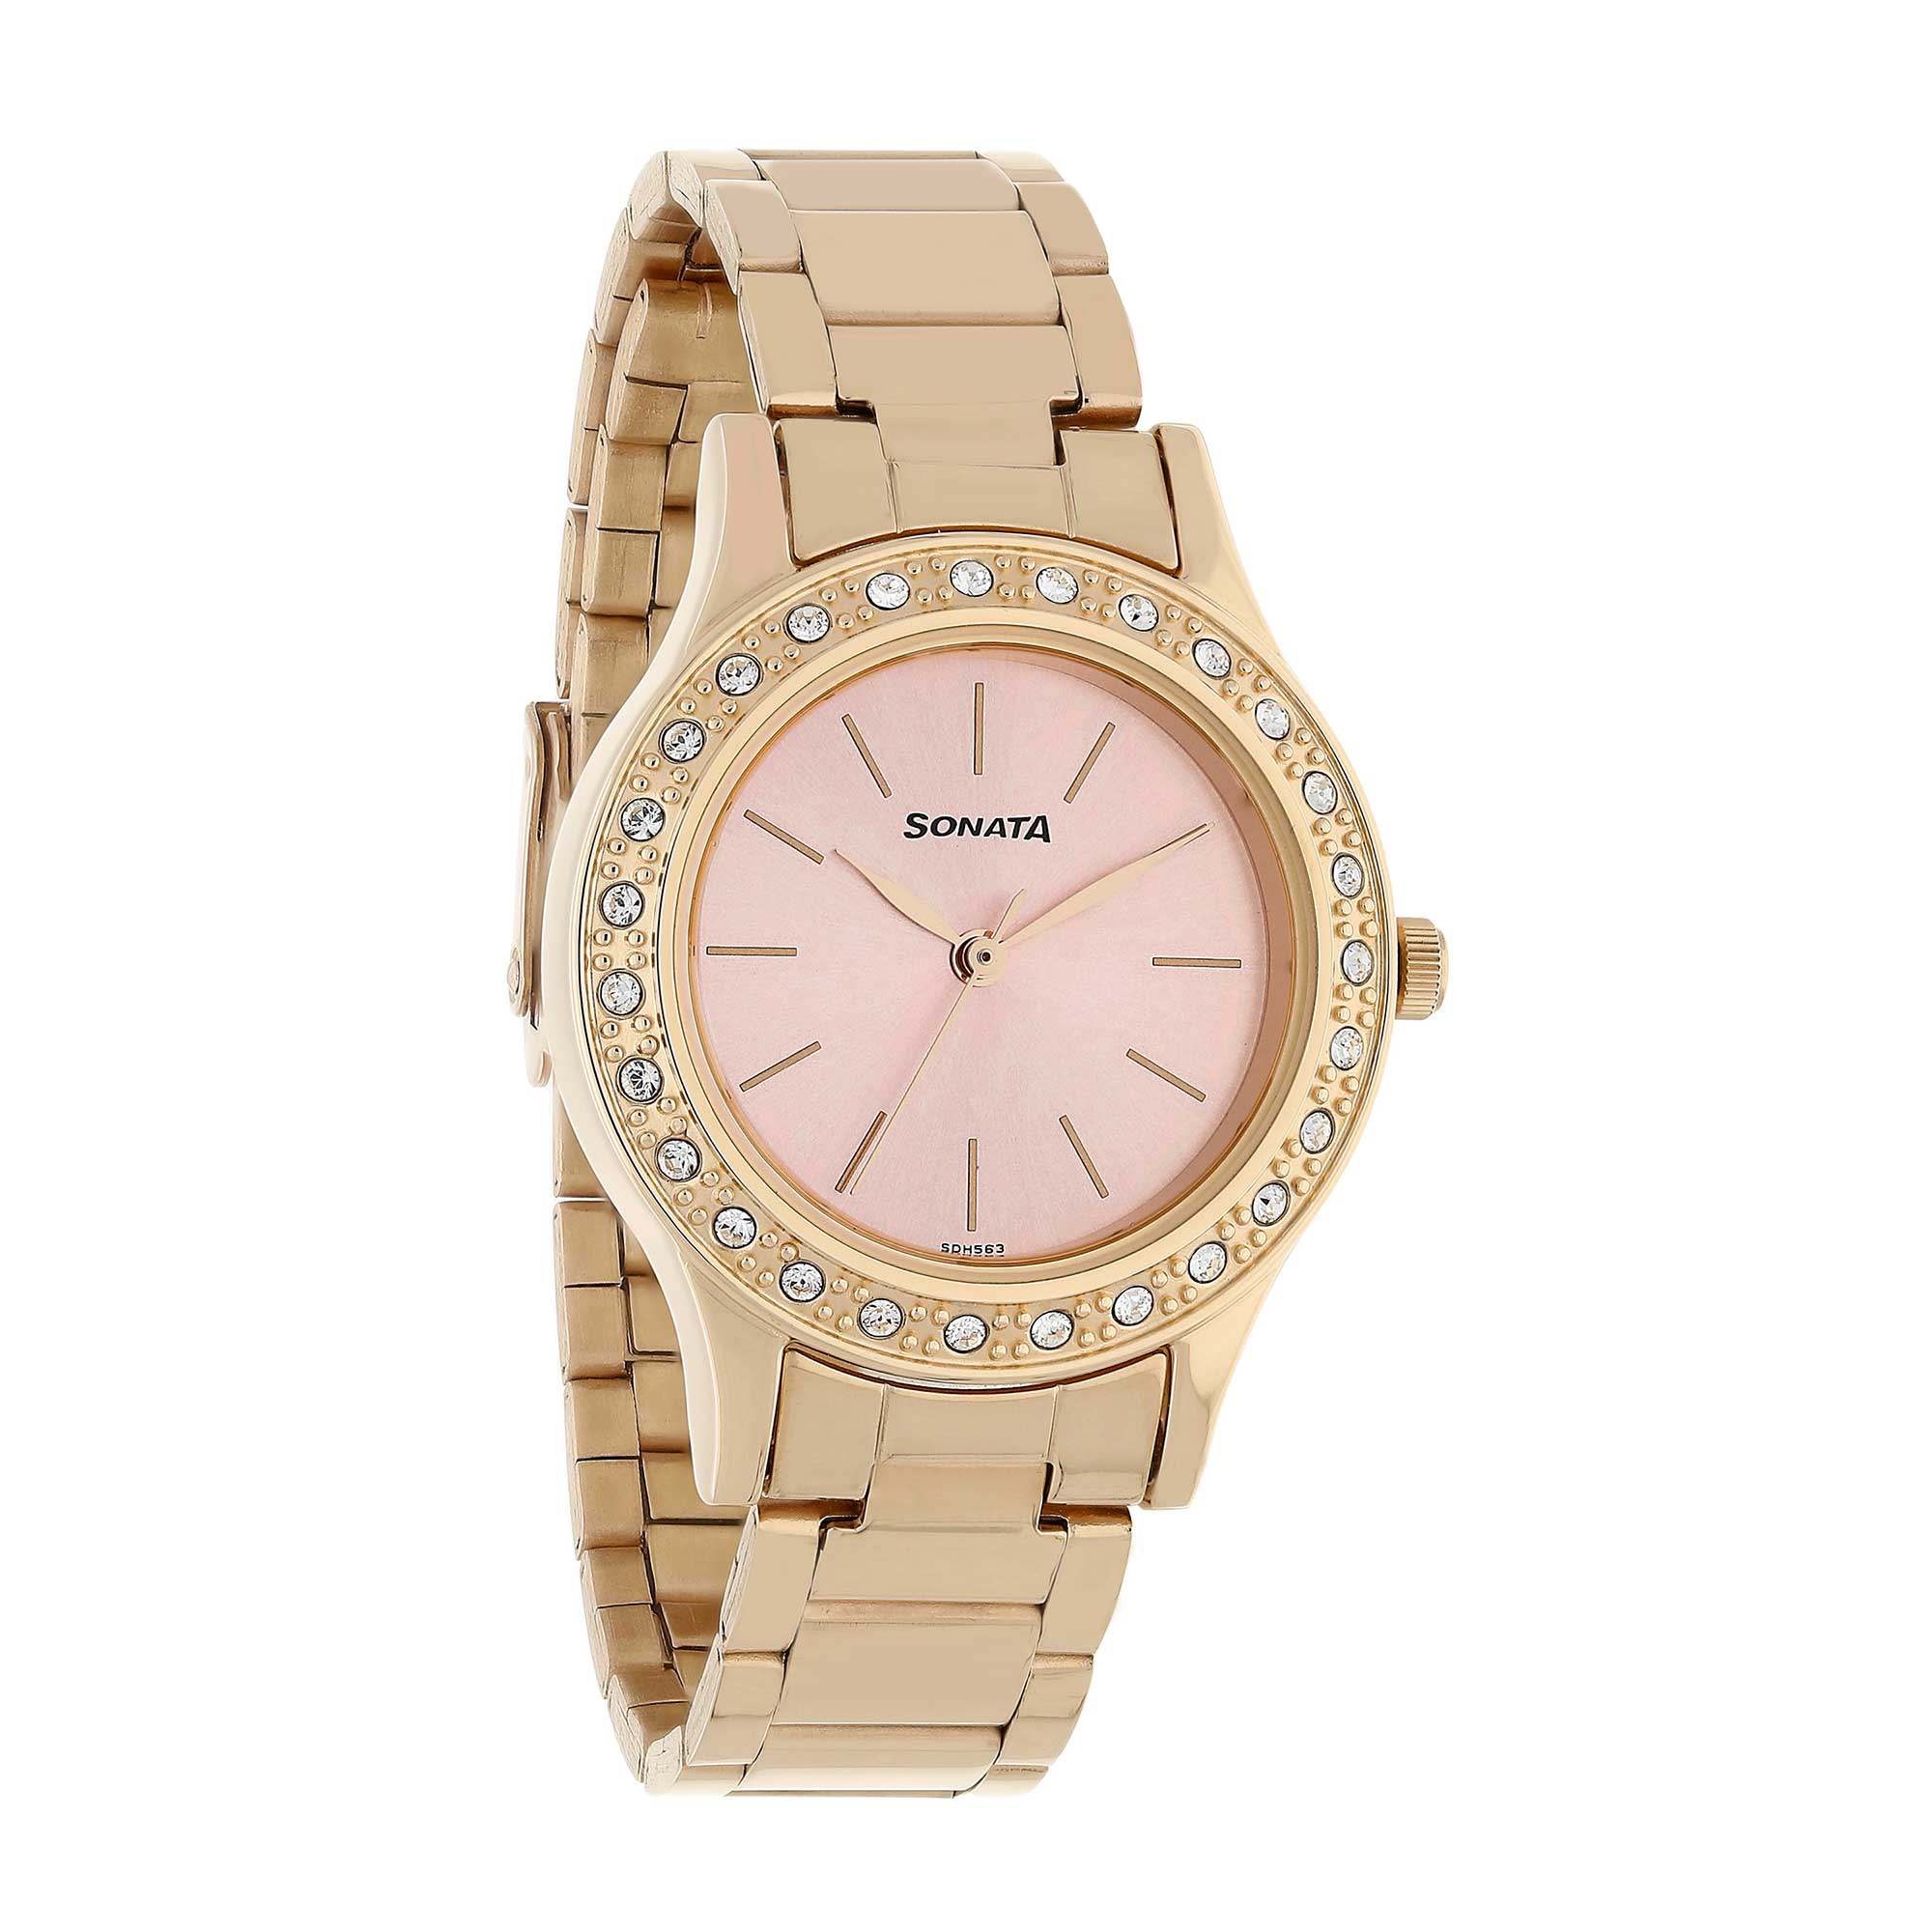 Sonata Blush Pink Dial Women Watch With Stainless Steel Strap